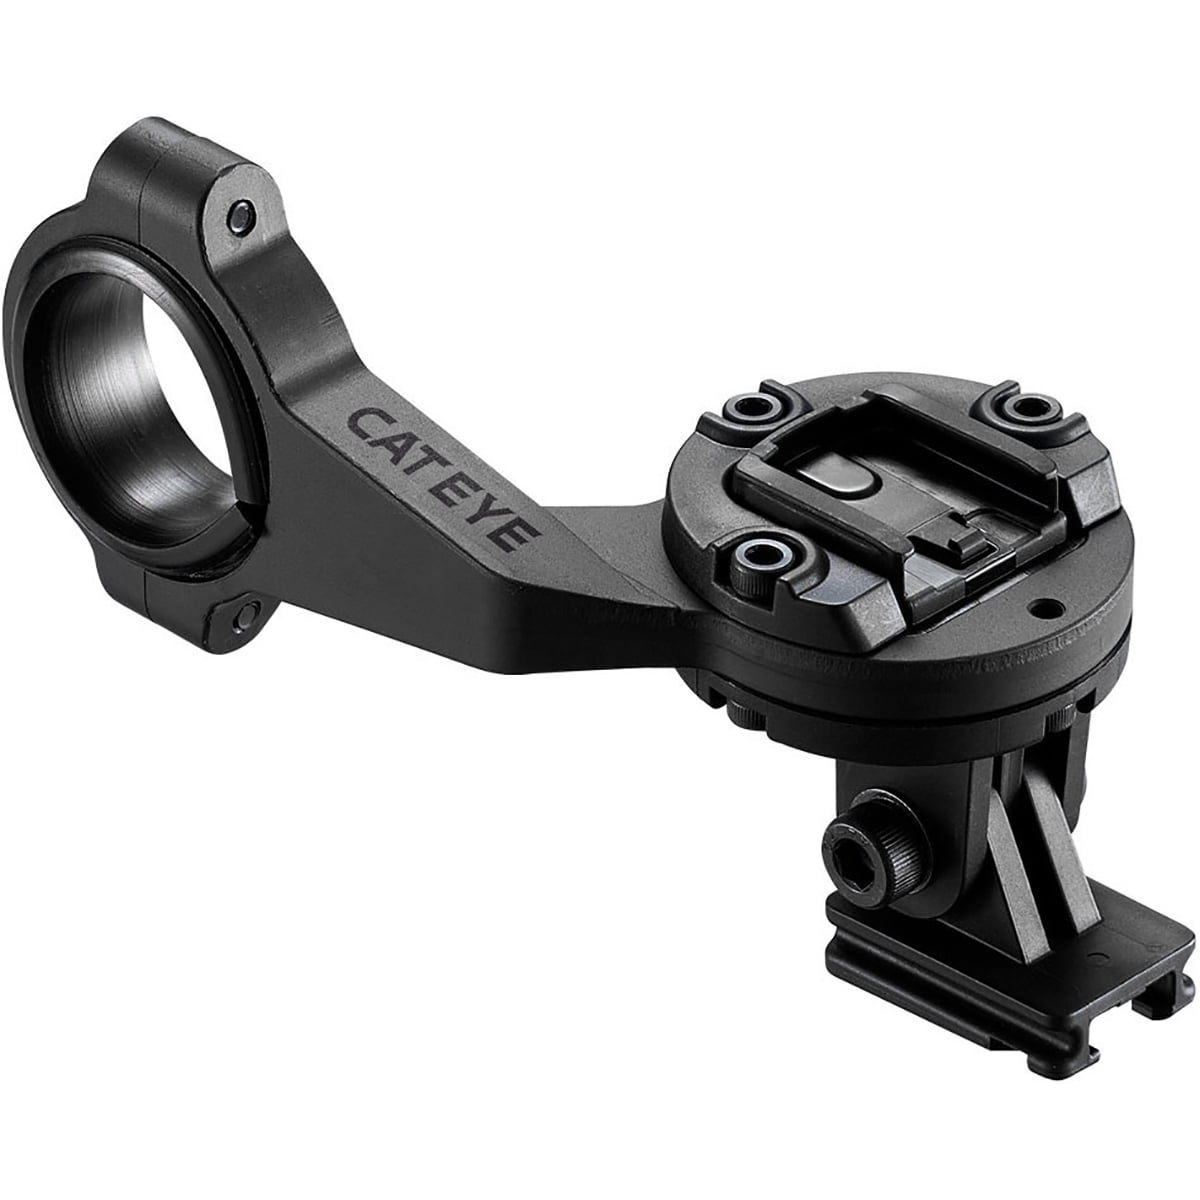 OF-100 CatEye Out Front Cycling Computer Handlebar Bracket 